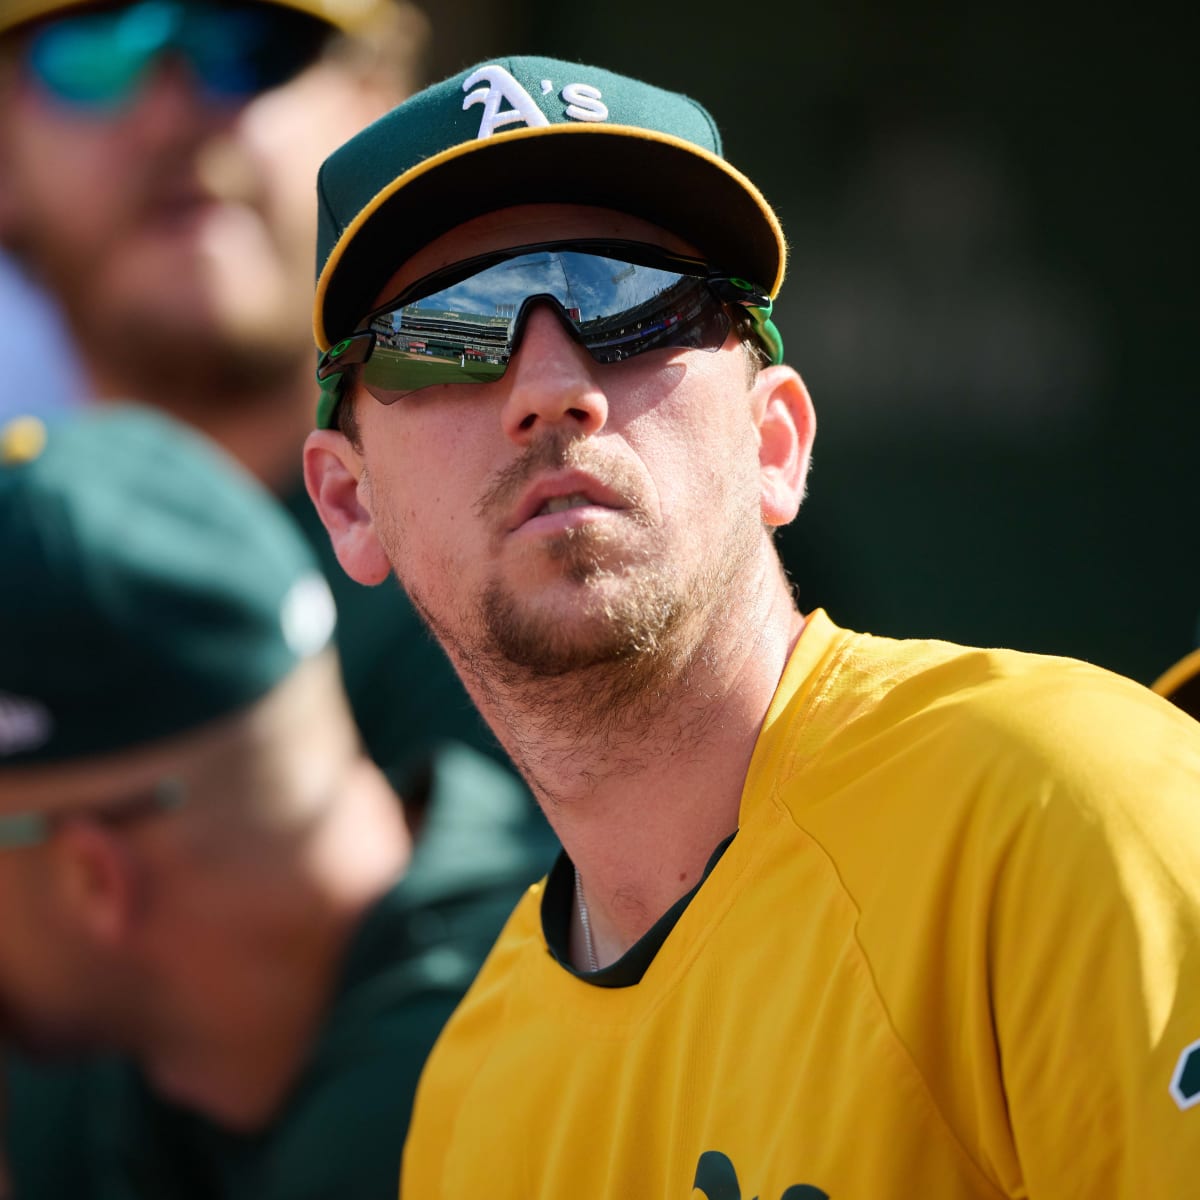 Pleasanton's Stephen Piscotty stays grounded while rising high in the  majors, News